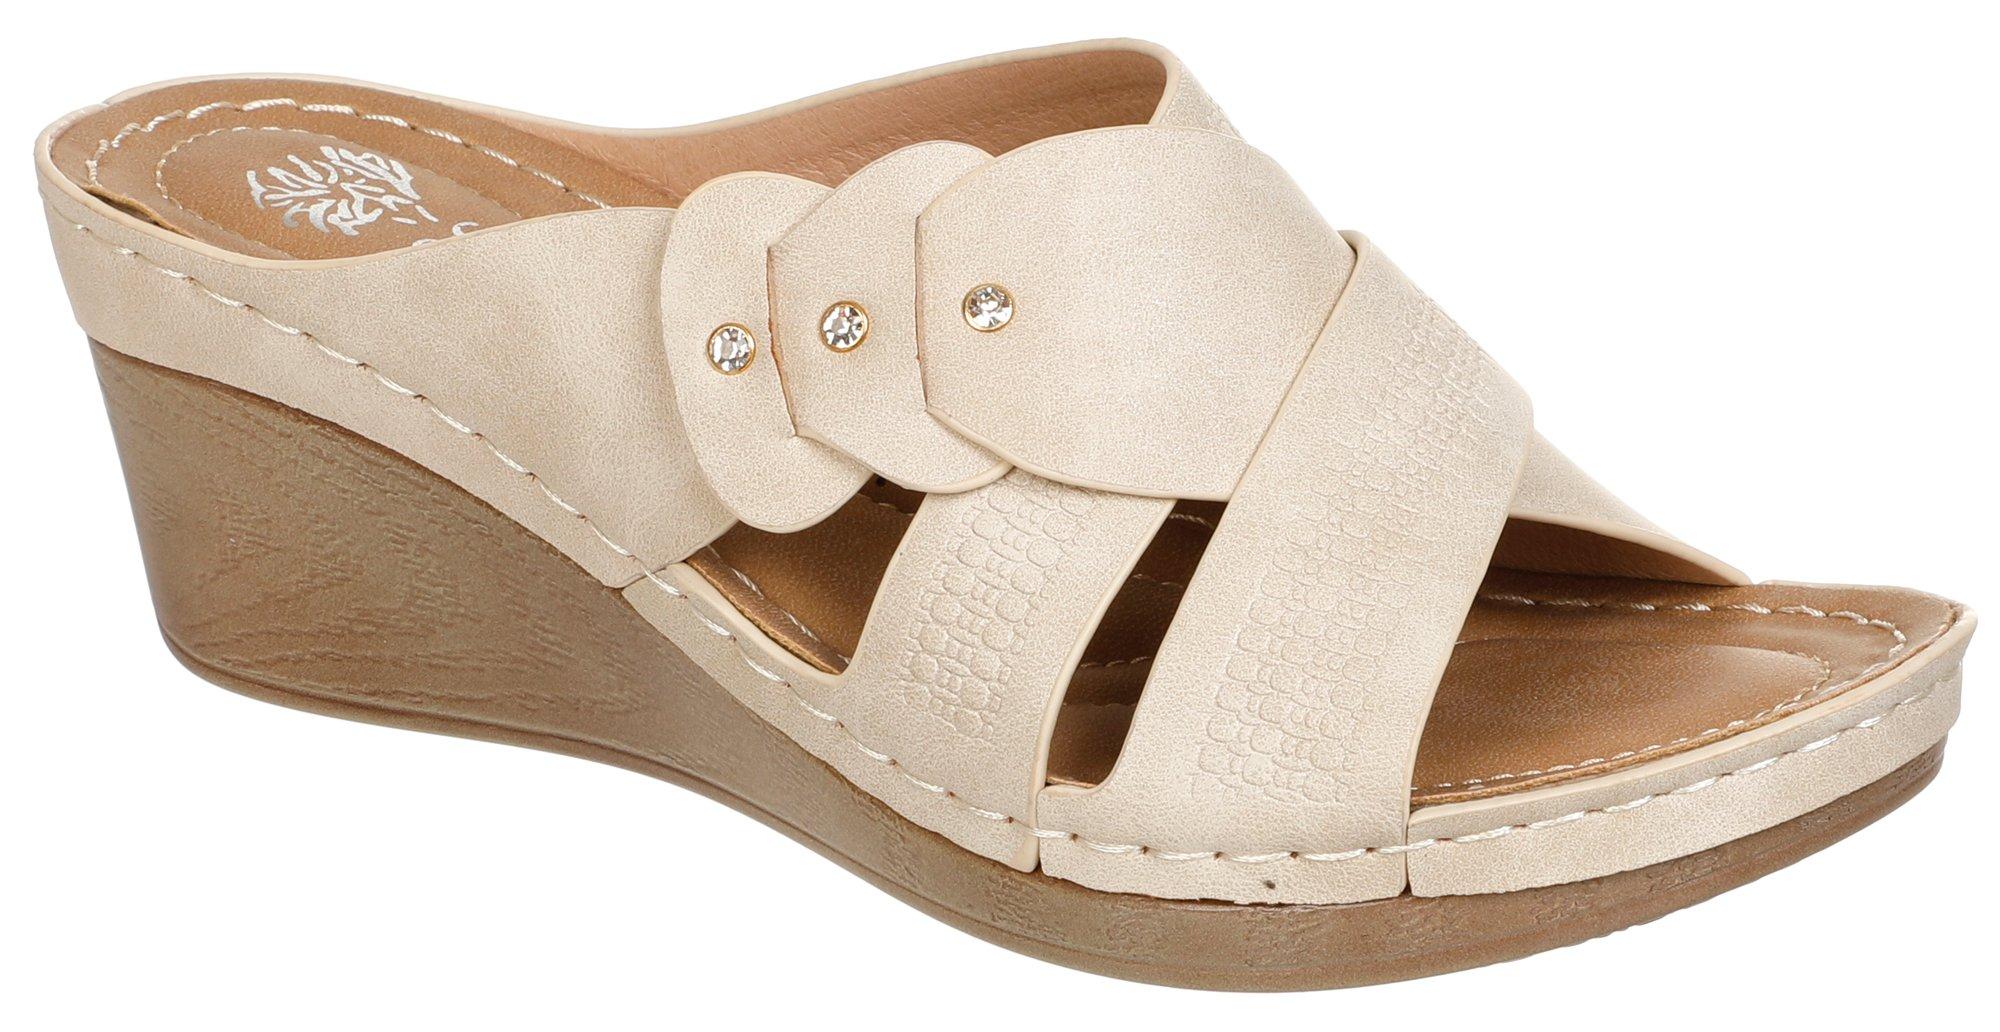 Women's X-Band Wedges